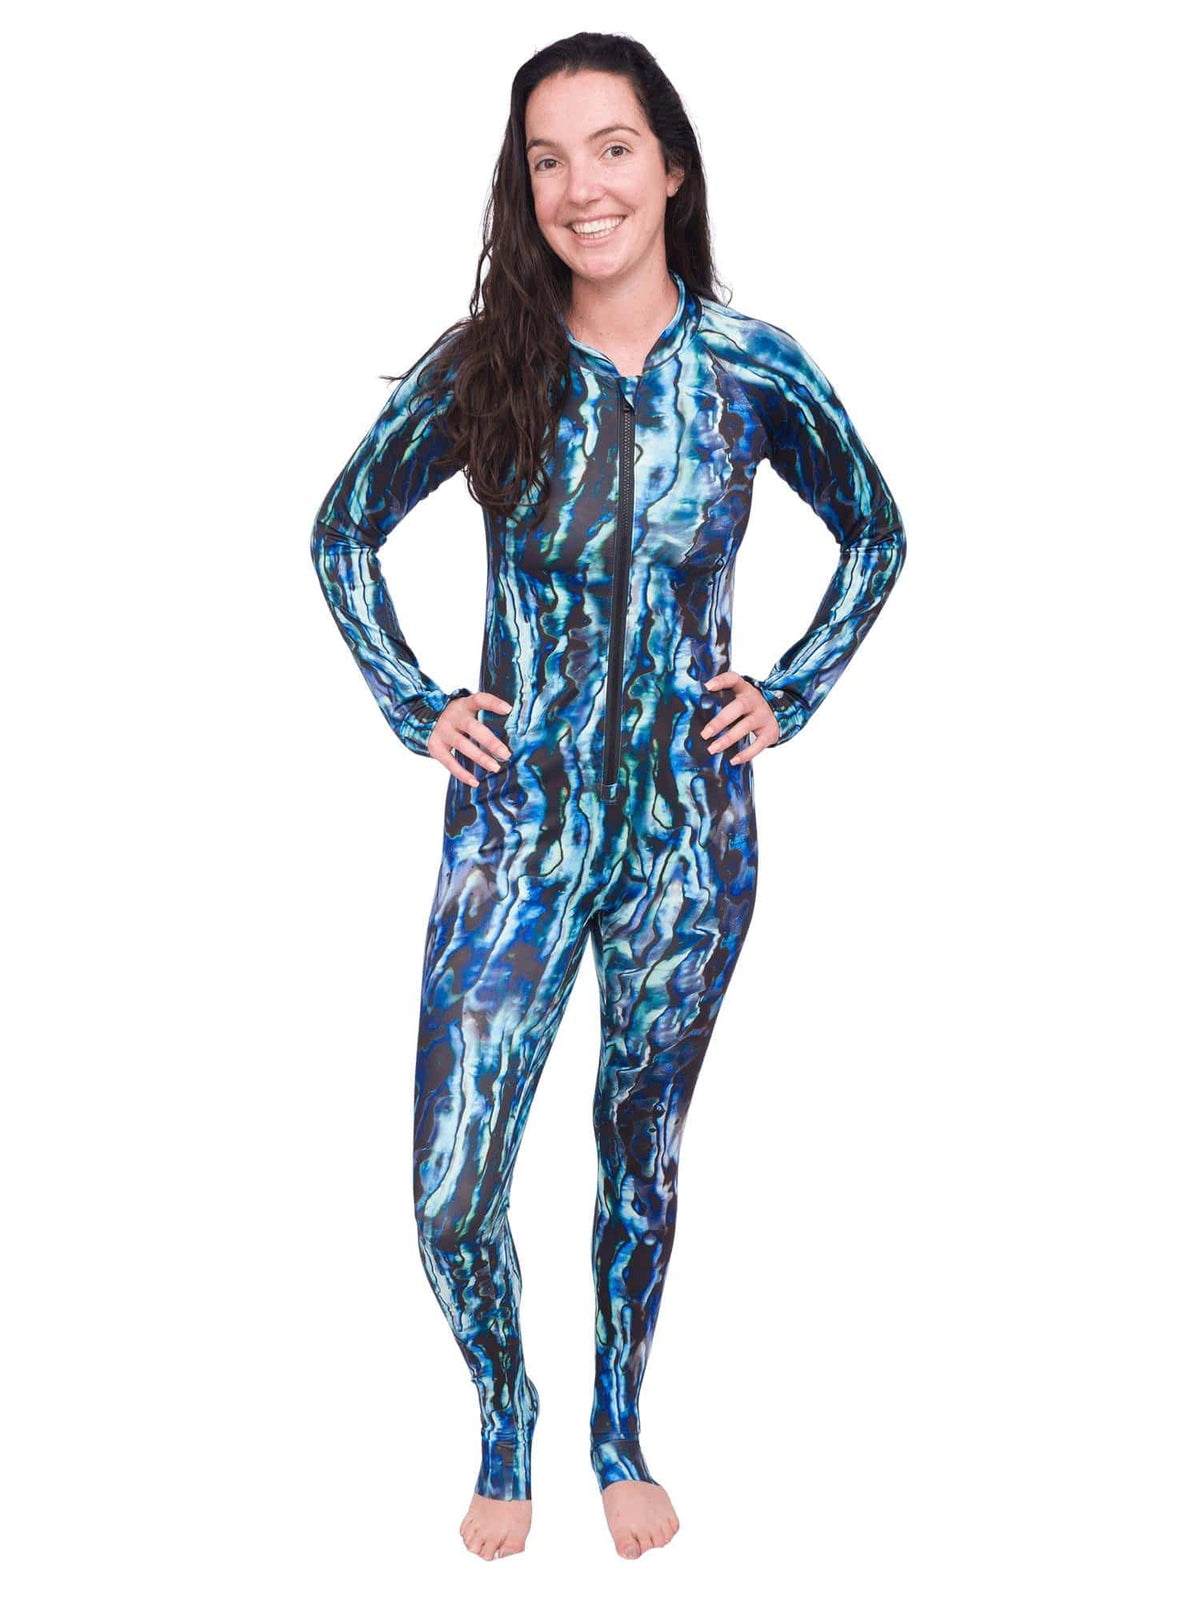 Model: Maddie is the Program &amp; Outreach Director at Debris Free Oceans and a restoration ecology educator. She is 5&#39;8&quot;, 135lbs, and wearing a size M.